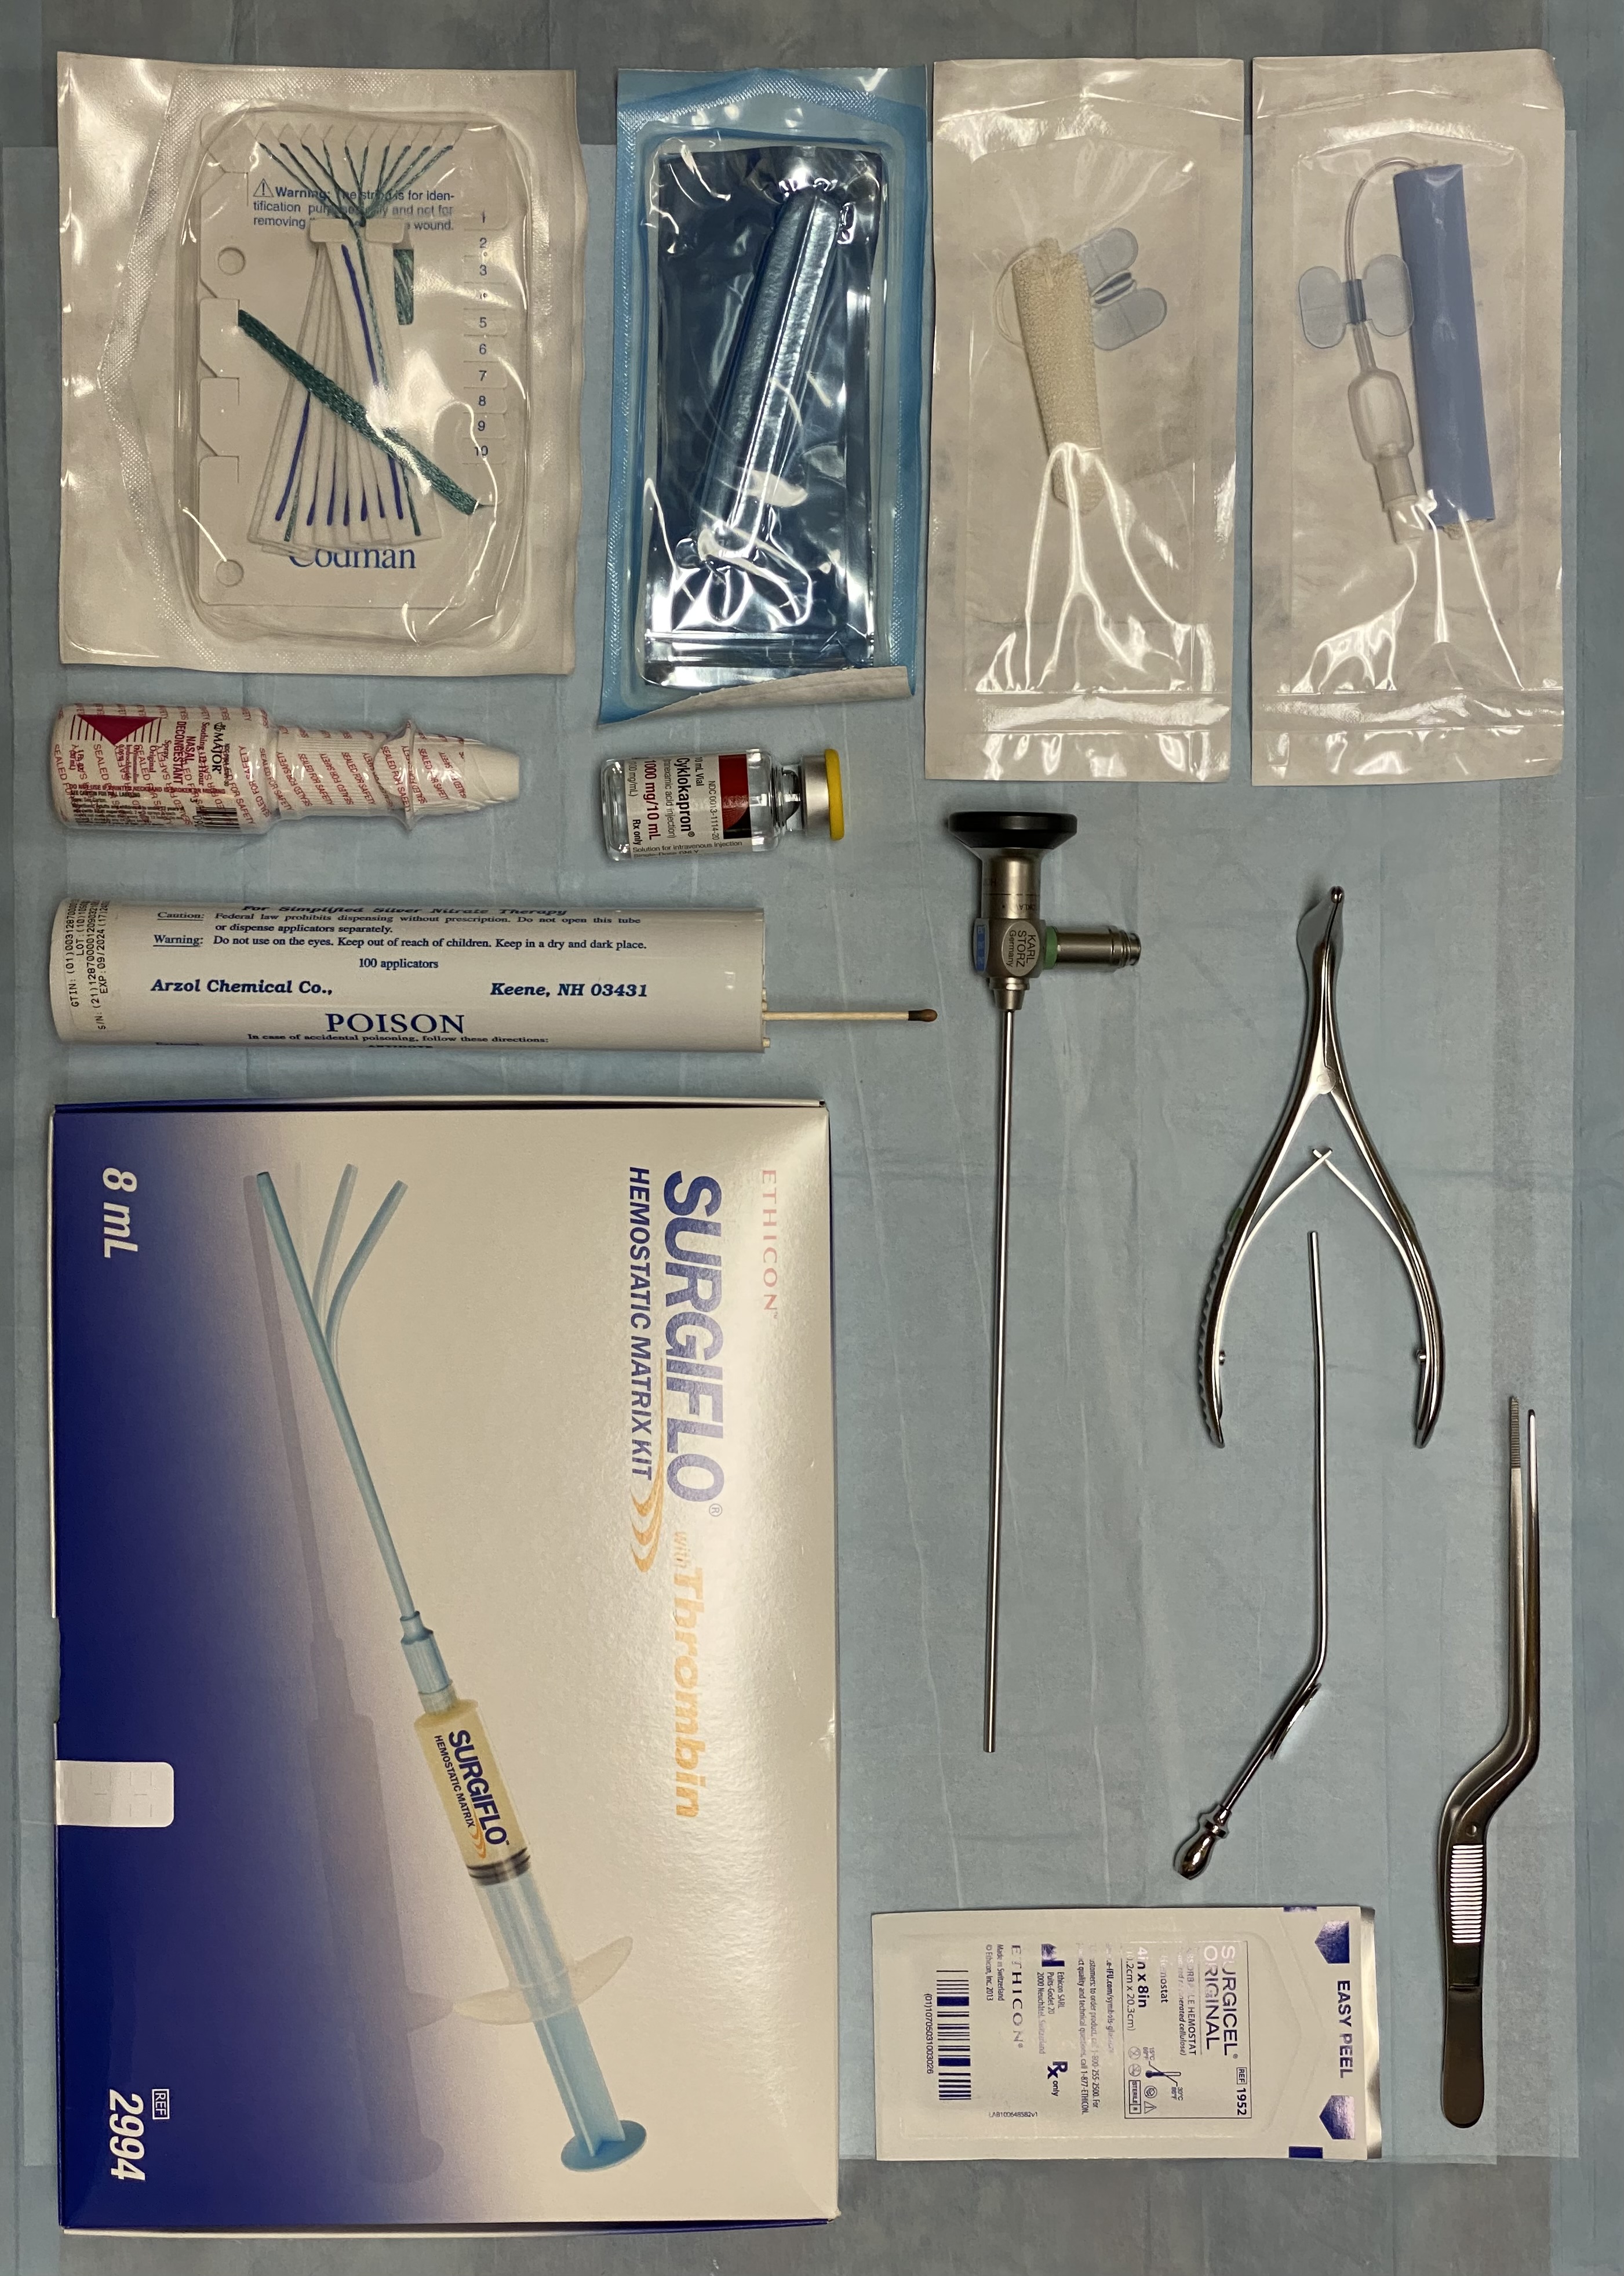 Supplies for management of epistaxis